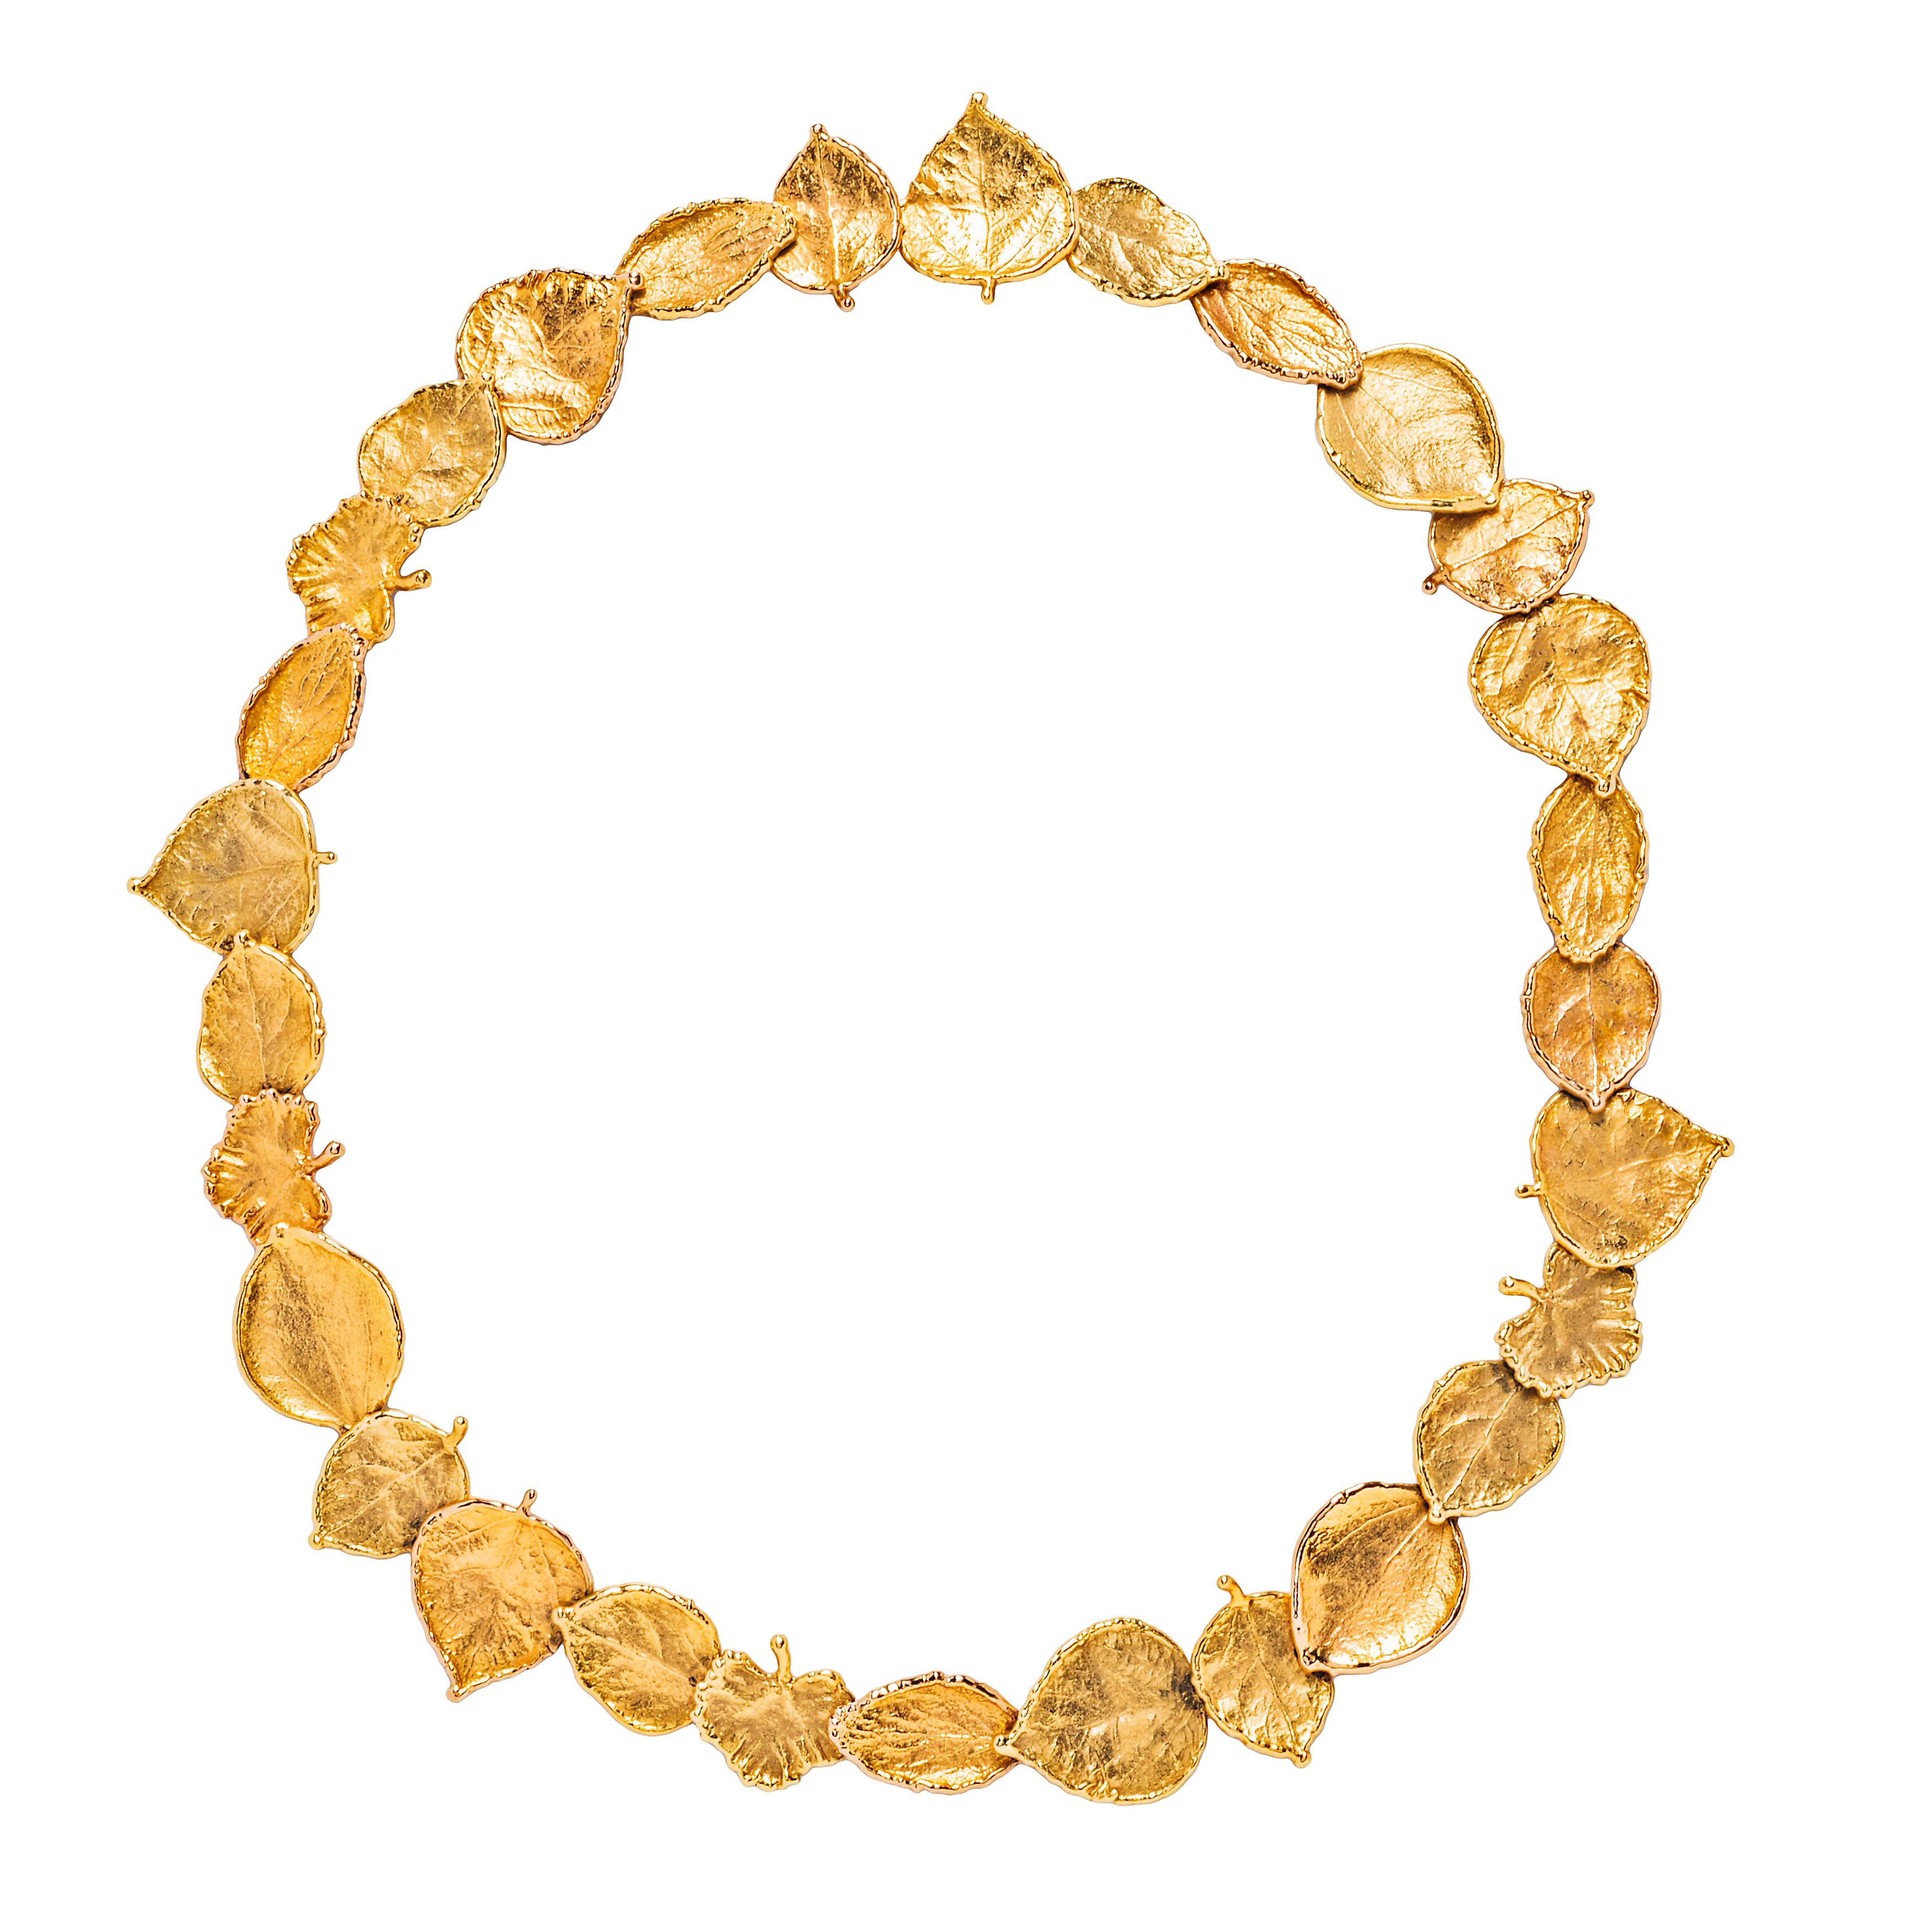 Comprising a necklace set with a series of links in the form of 19k and 18k yellow gold leaves of varying shapes, with ‘AH’ maker’s mark; and a pair of earrings of similar design, with diamond-set stems, set in 18k yellow gold and platinum, signed